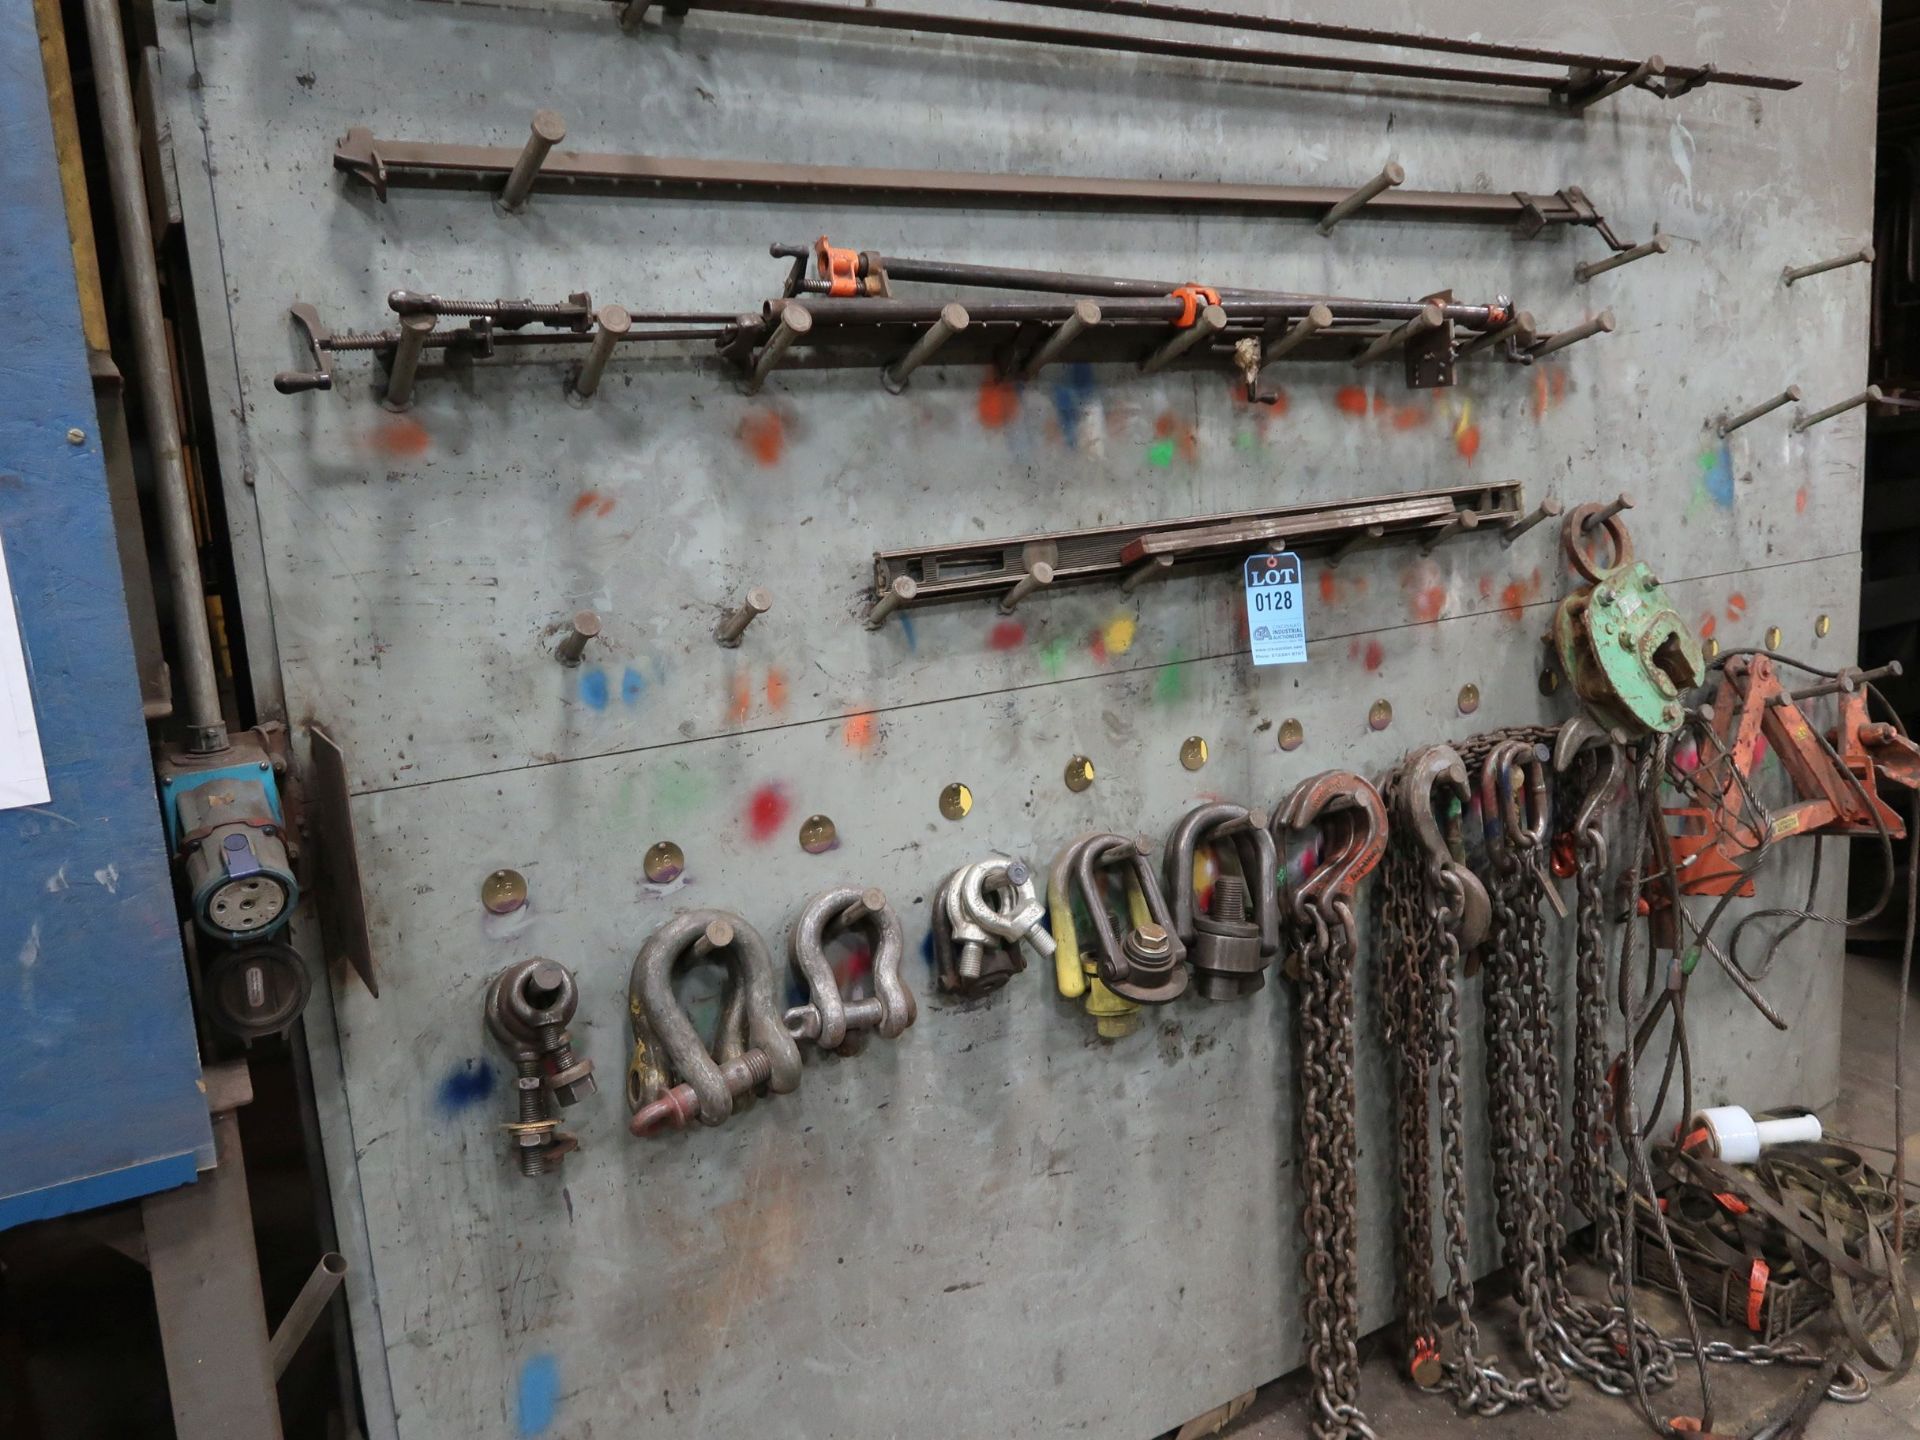 (LOT) LIFTING EQUIPMENT ON WALL, (5) SWIVEL EYES, (4) SHACKLES, (2) CHAINS & MISC.